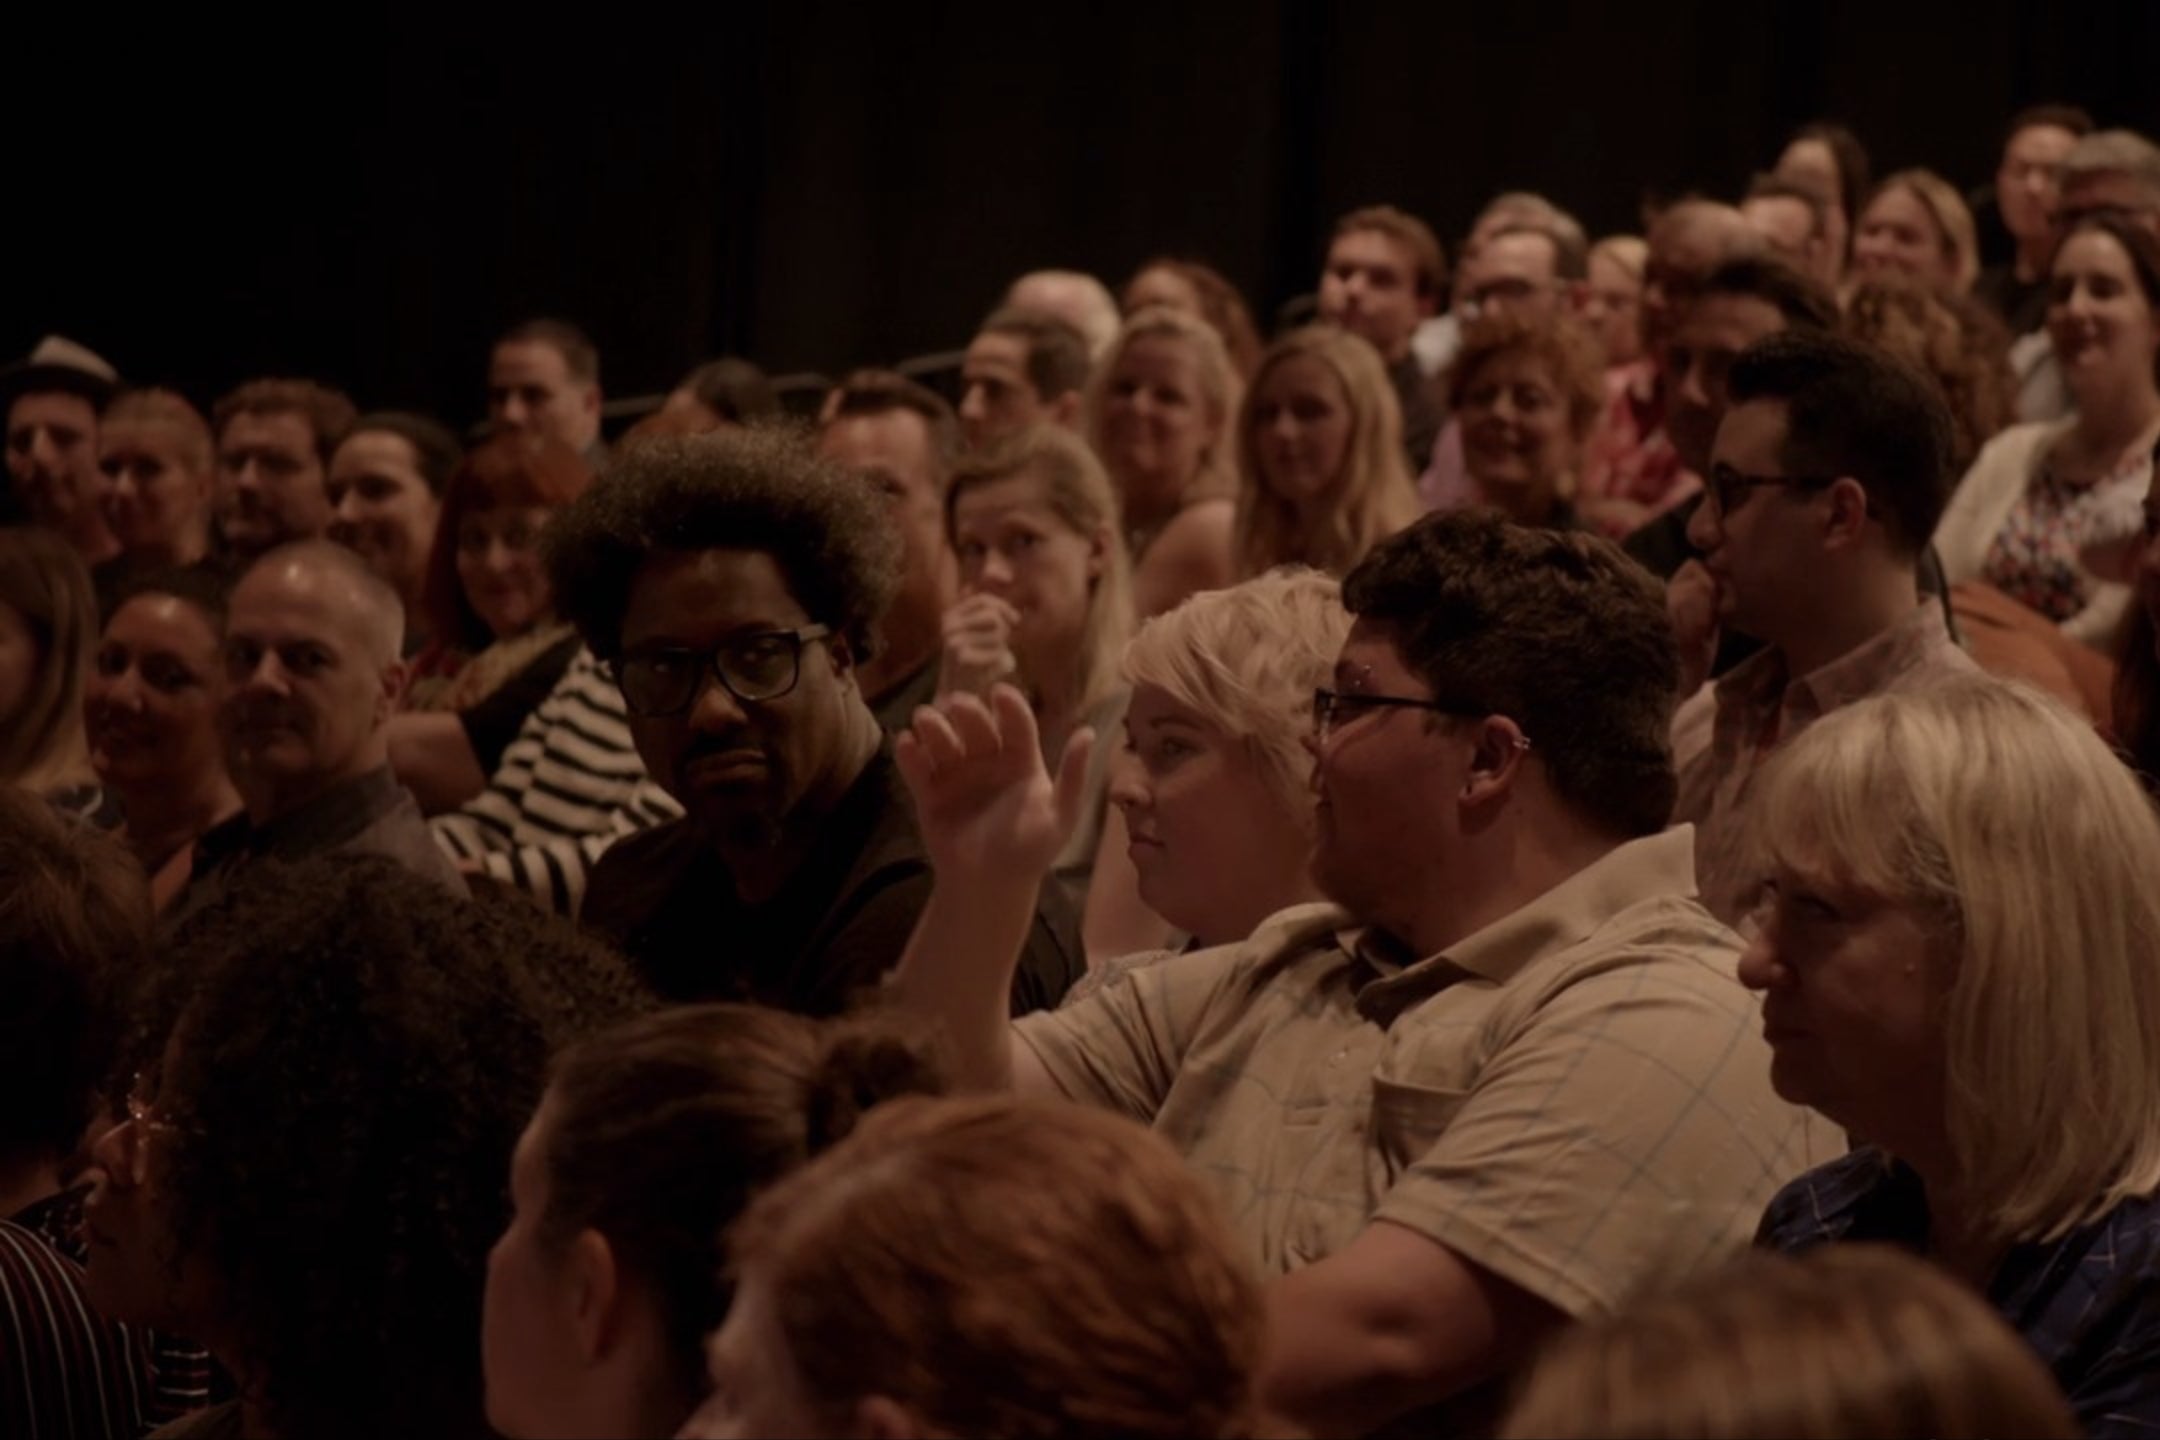 A theater audience. W. Kamau Bell and Gavin Grimm are seated towards the front; Susan Sarandon is visible in the back.